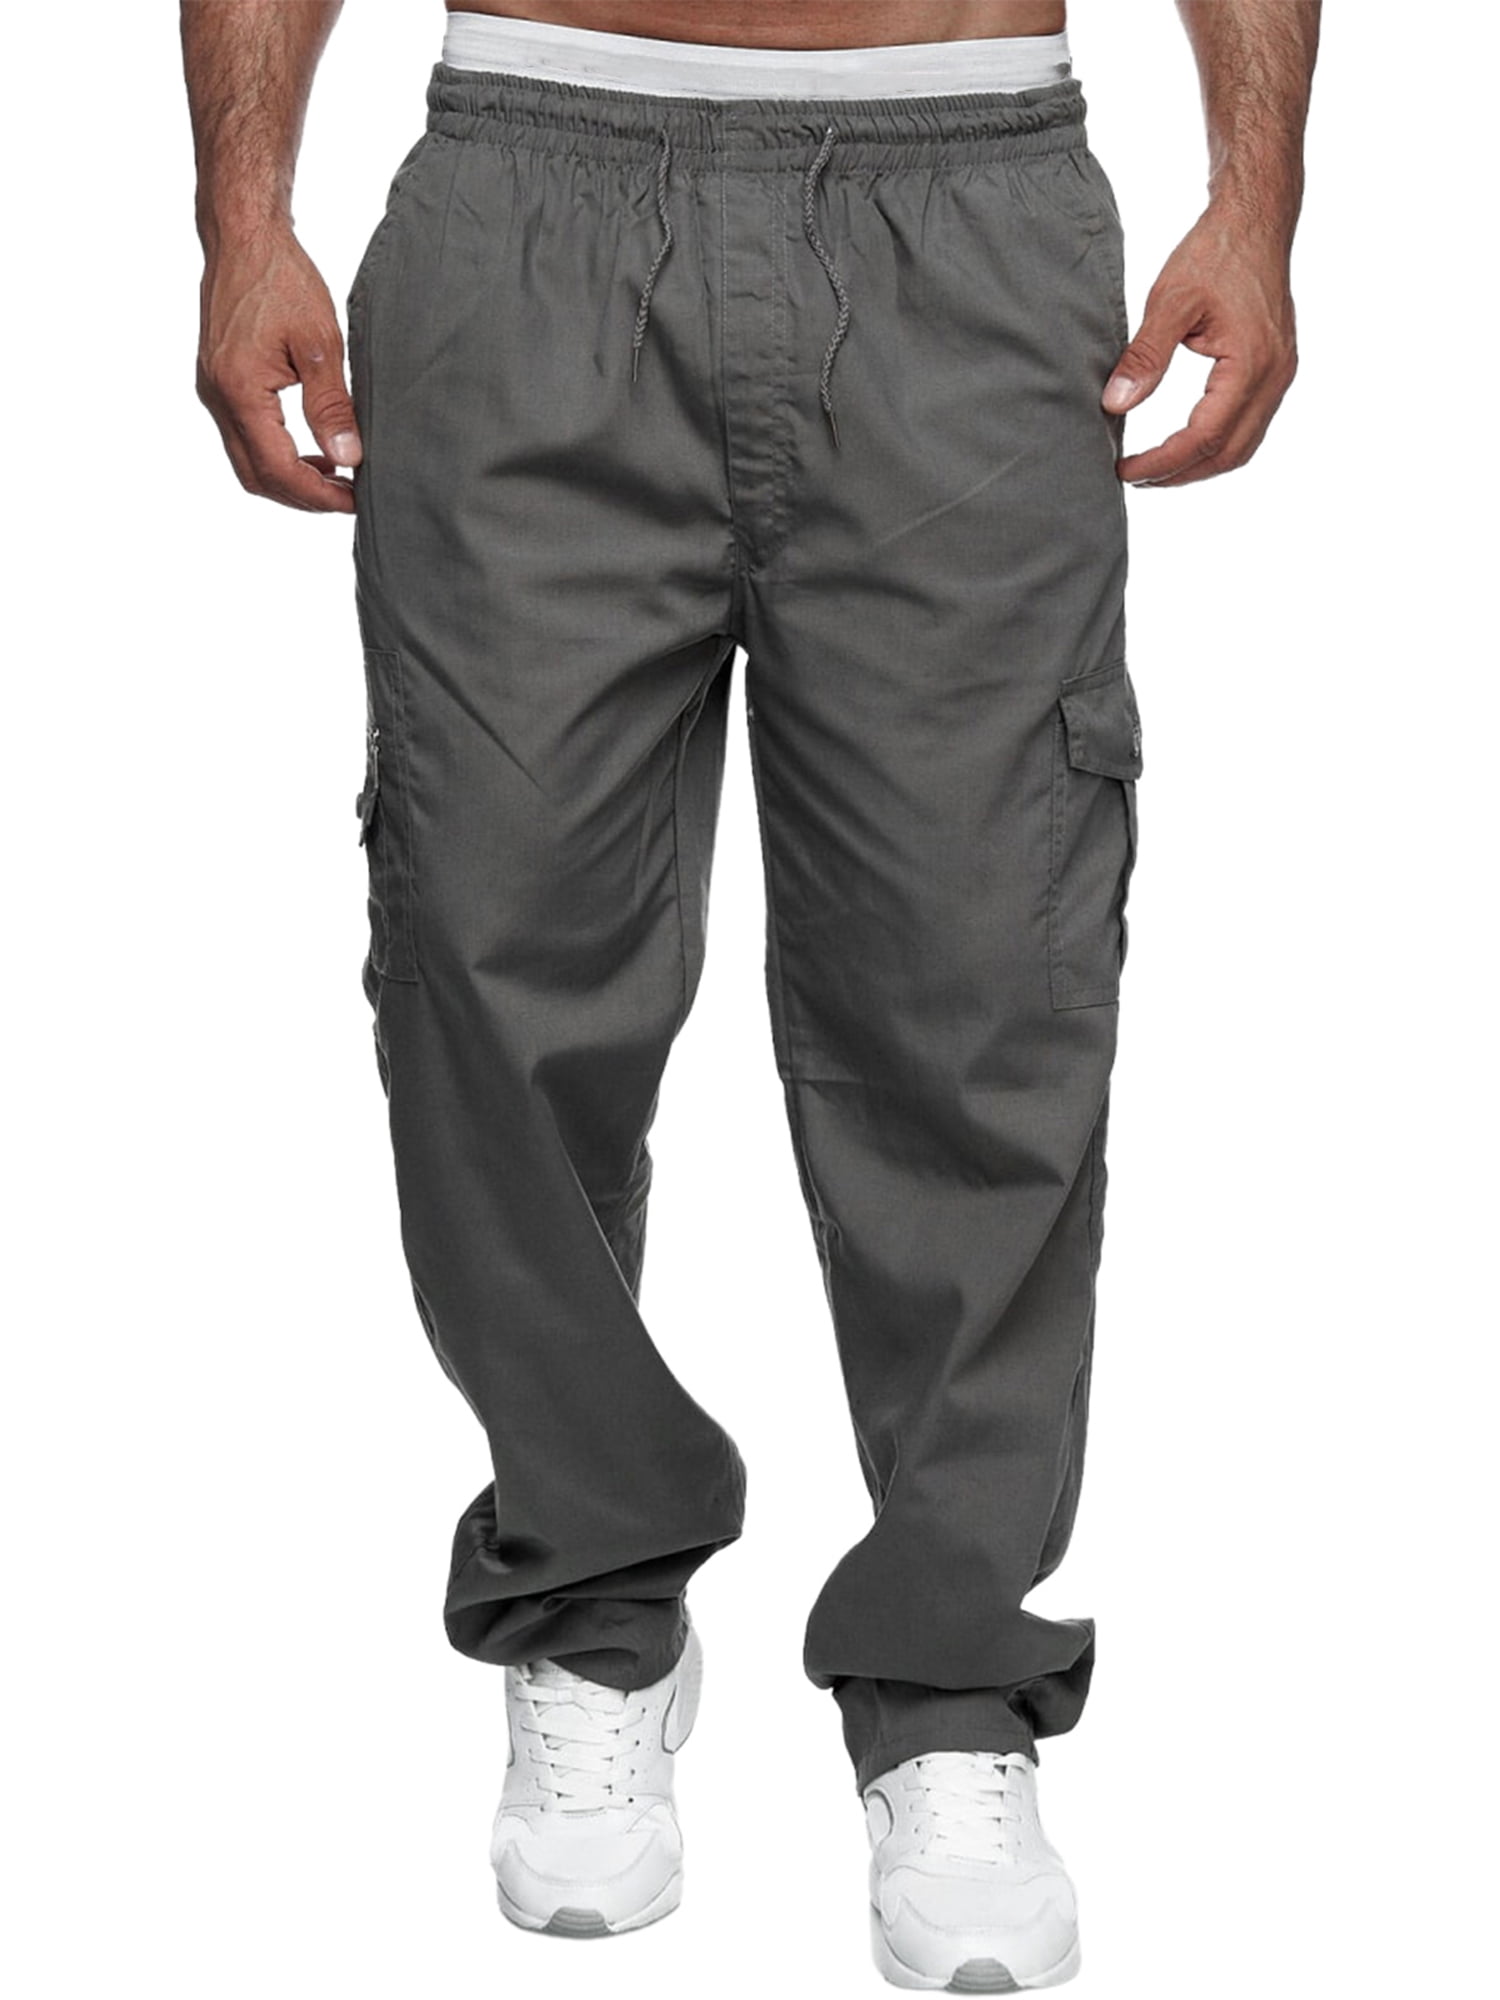 One opening Mens Pants Cargo Joggers Sweatpants Casual Pant Slim Fit Chino  Trousers with Pockets 